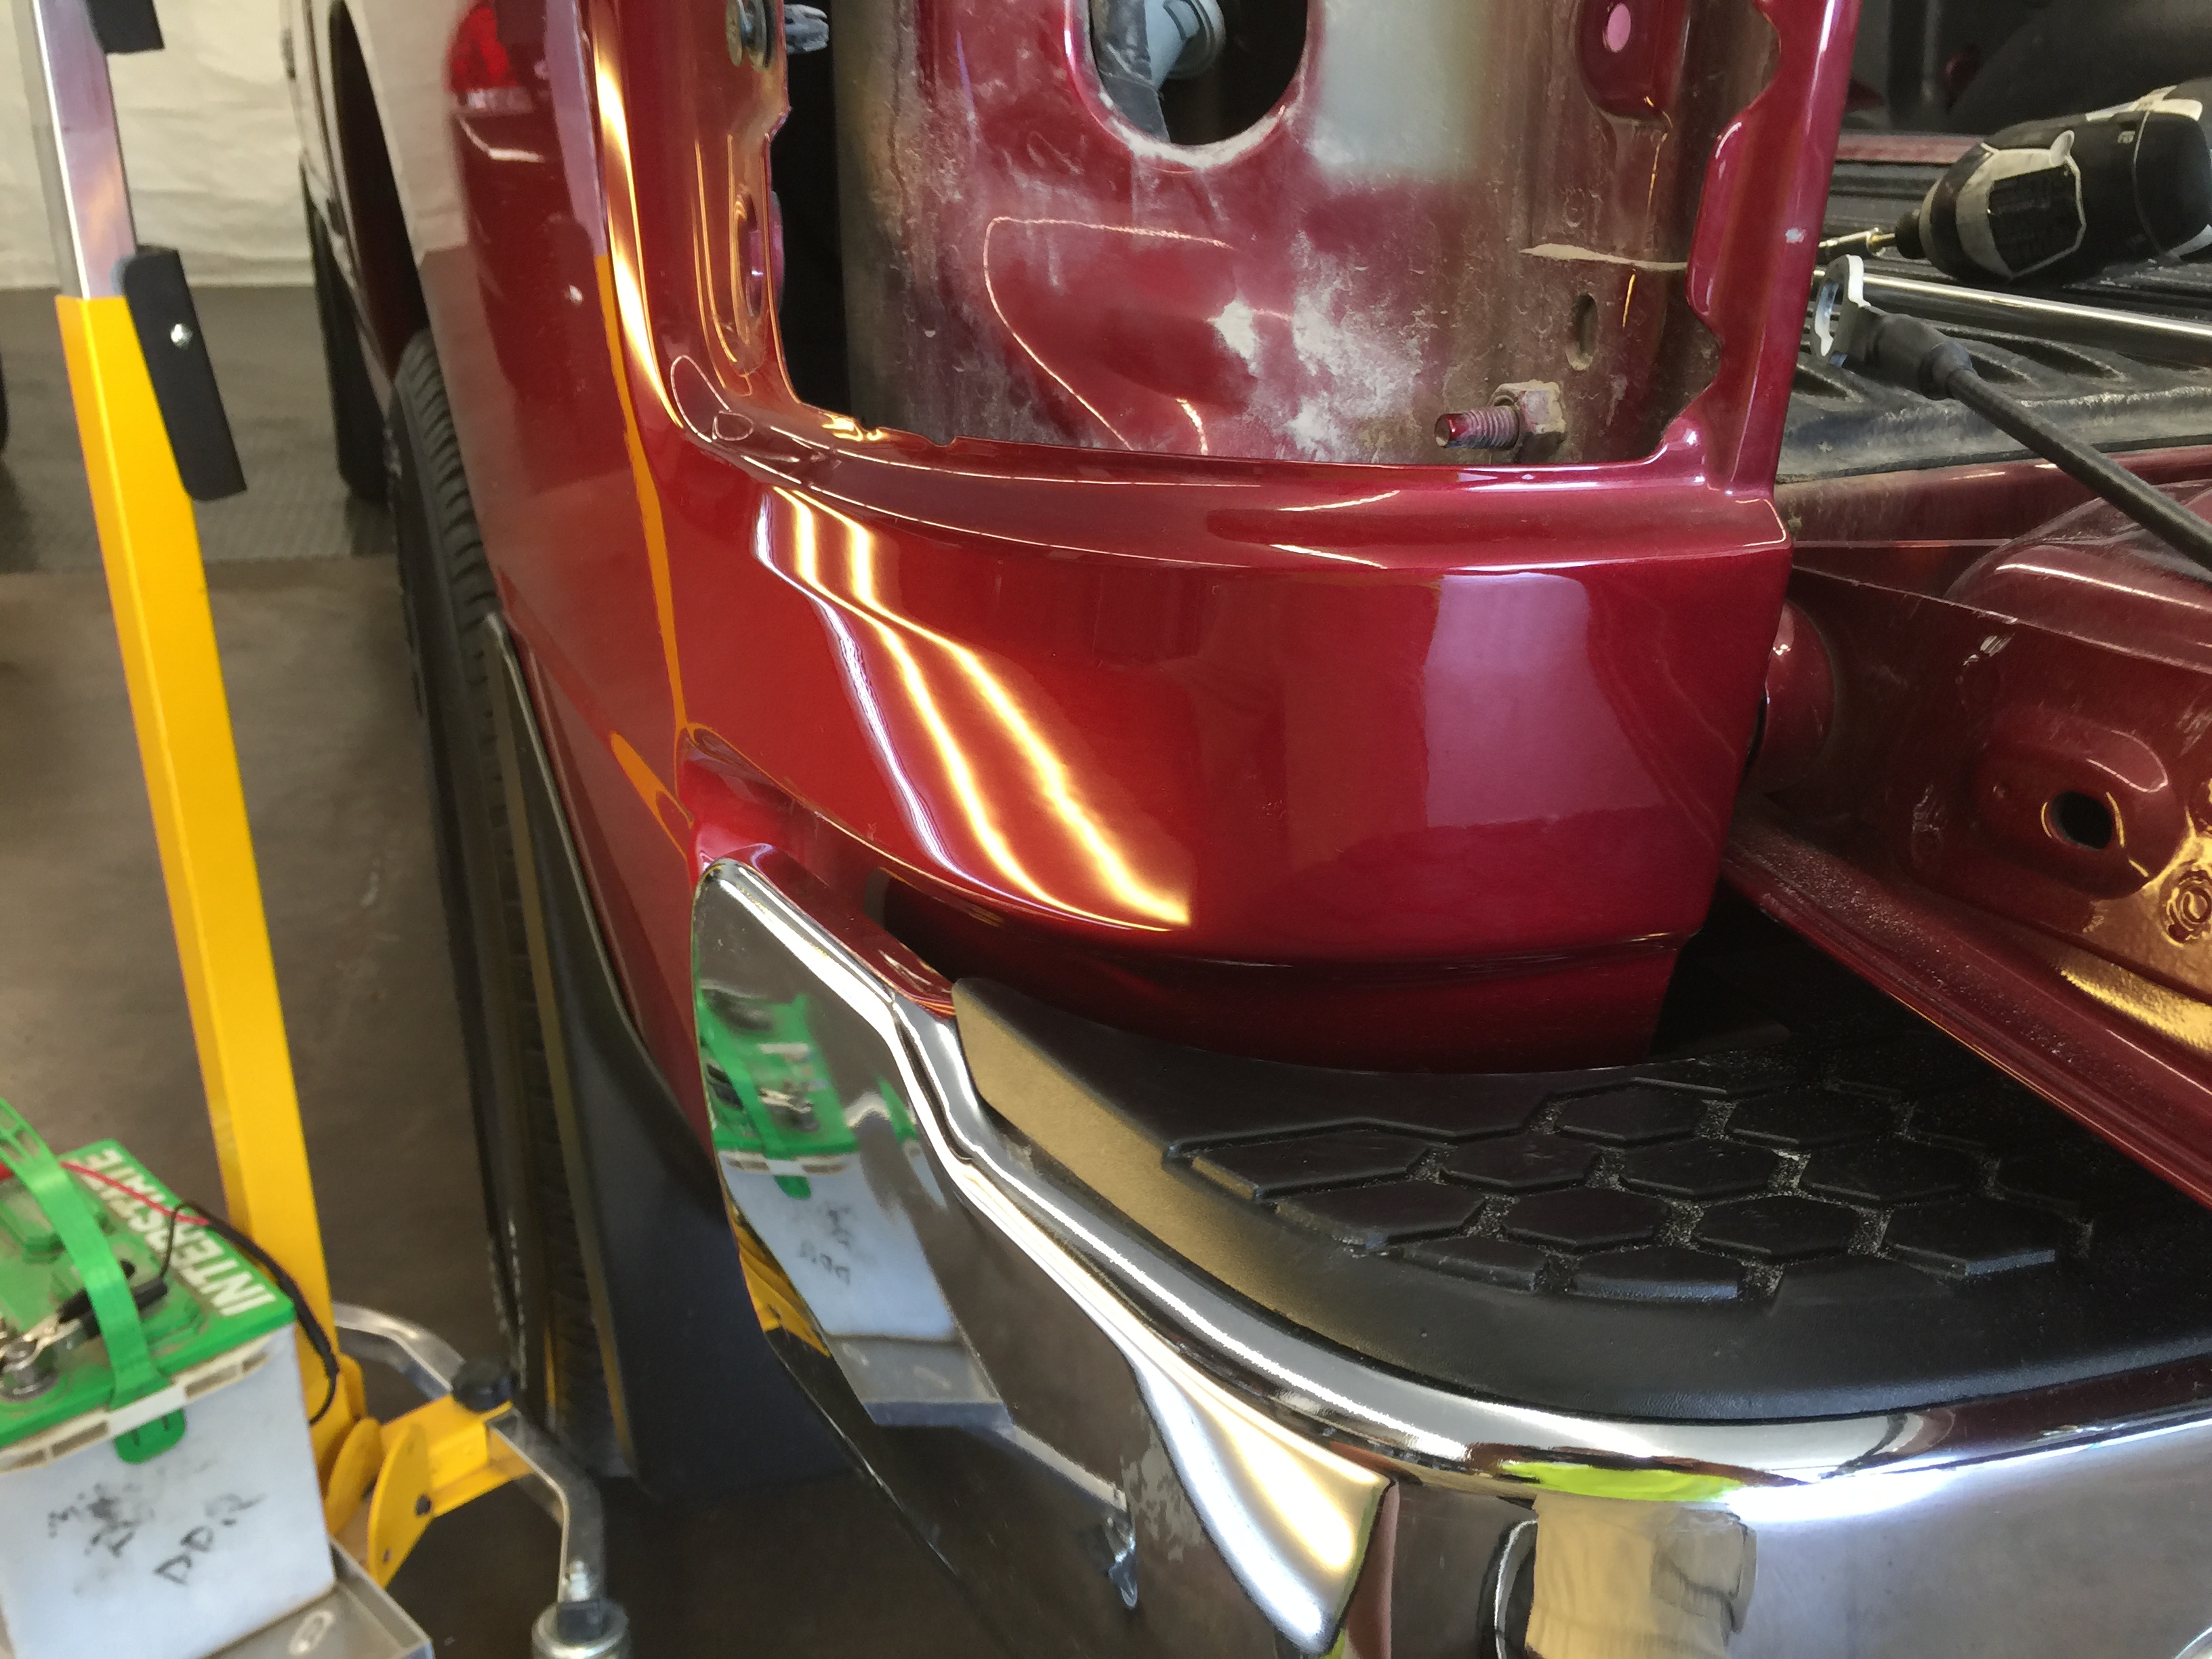 2015 Dodge Ram Dent Removal, Springfield, IL http://217dent.com Bedside Paintless Dent Repair, Mobile dent removal